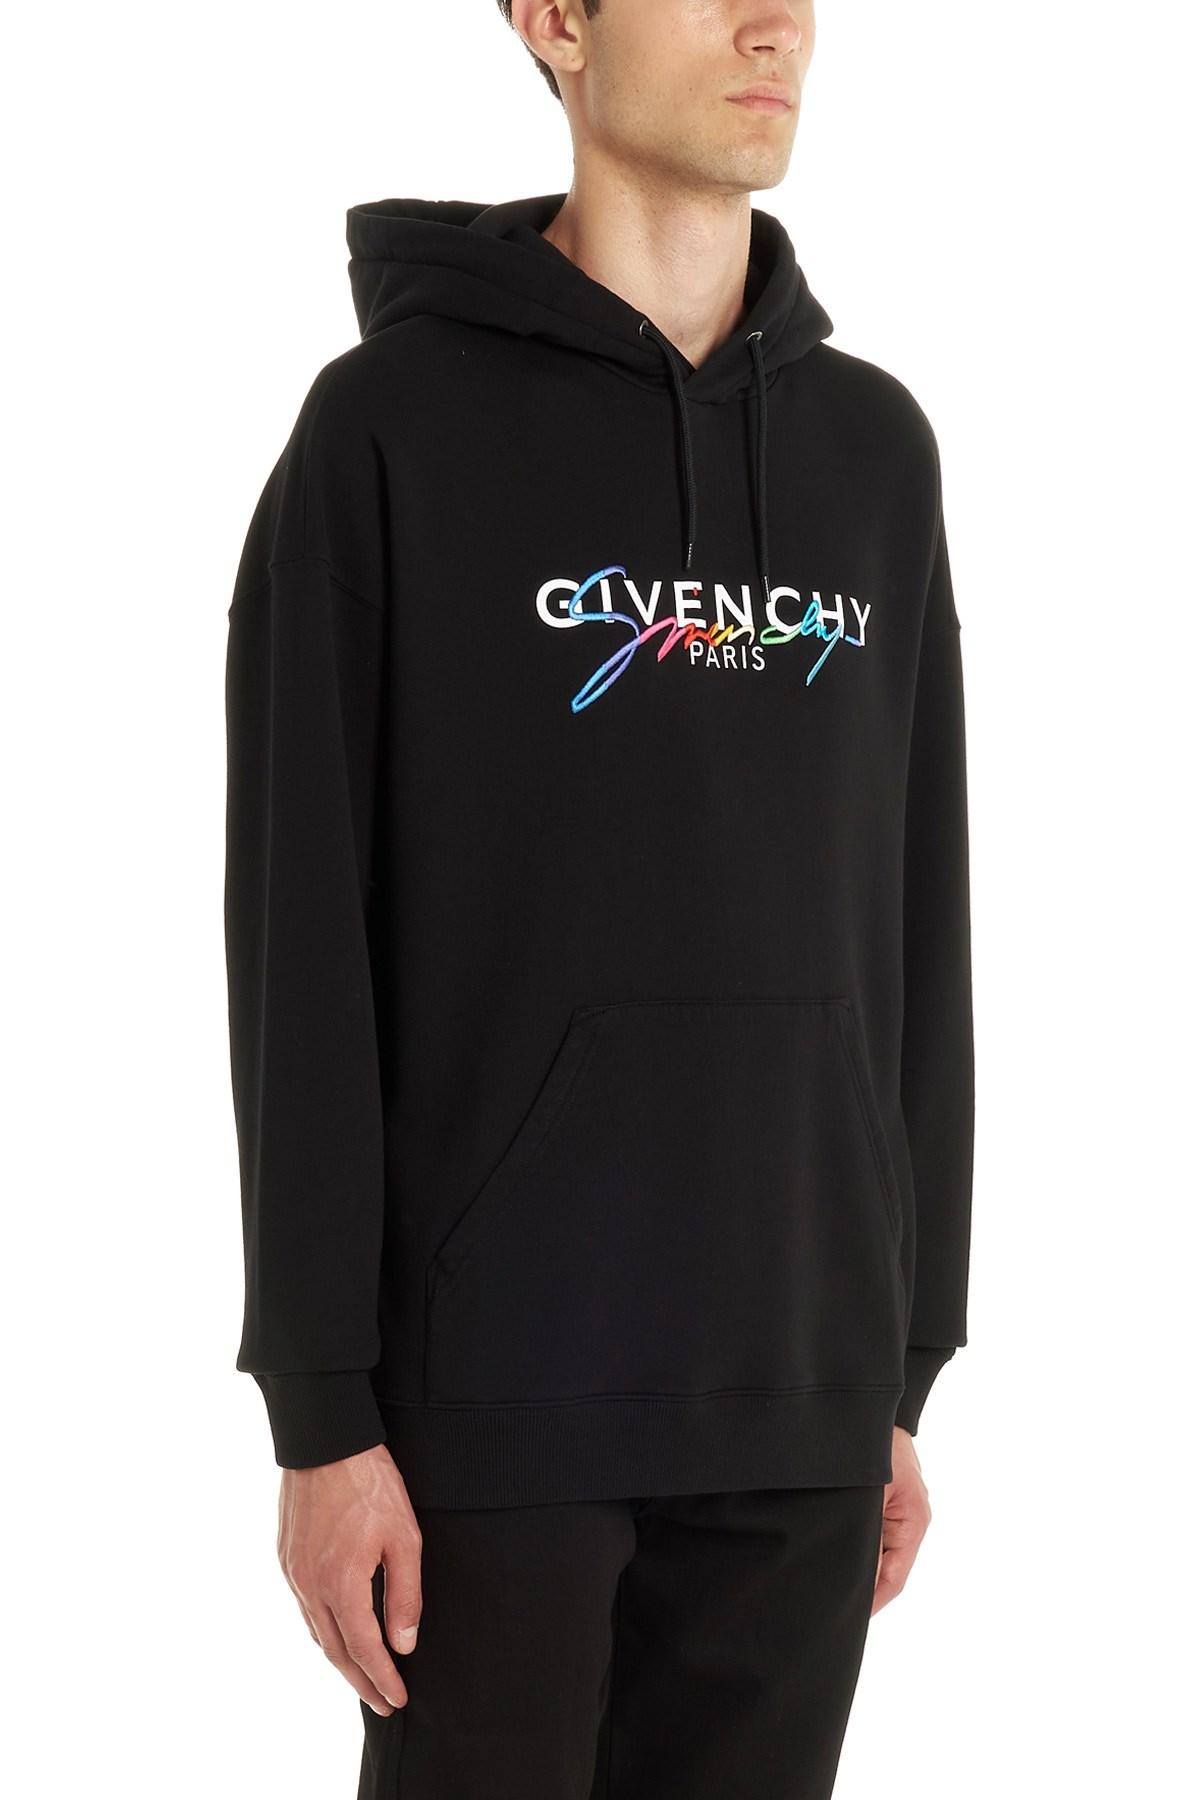 Givenchy Cotton 'rainbow' Hoodie in 